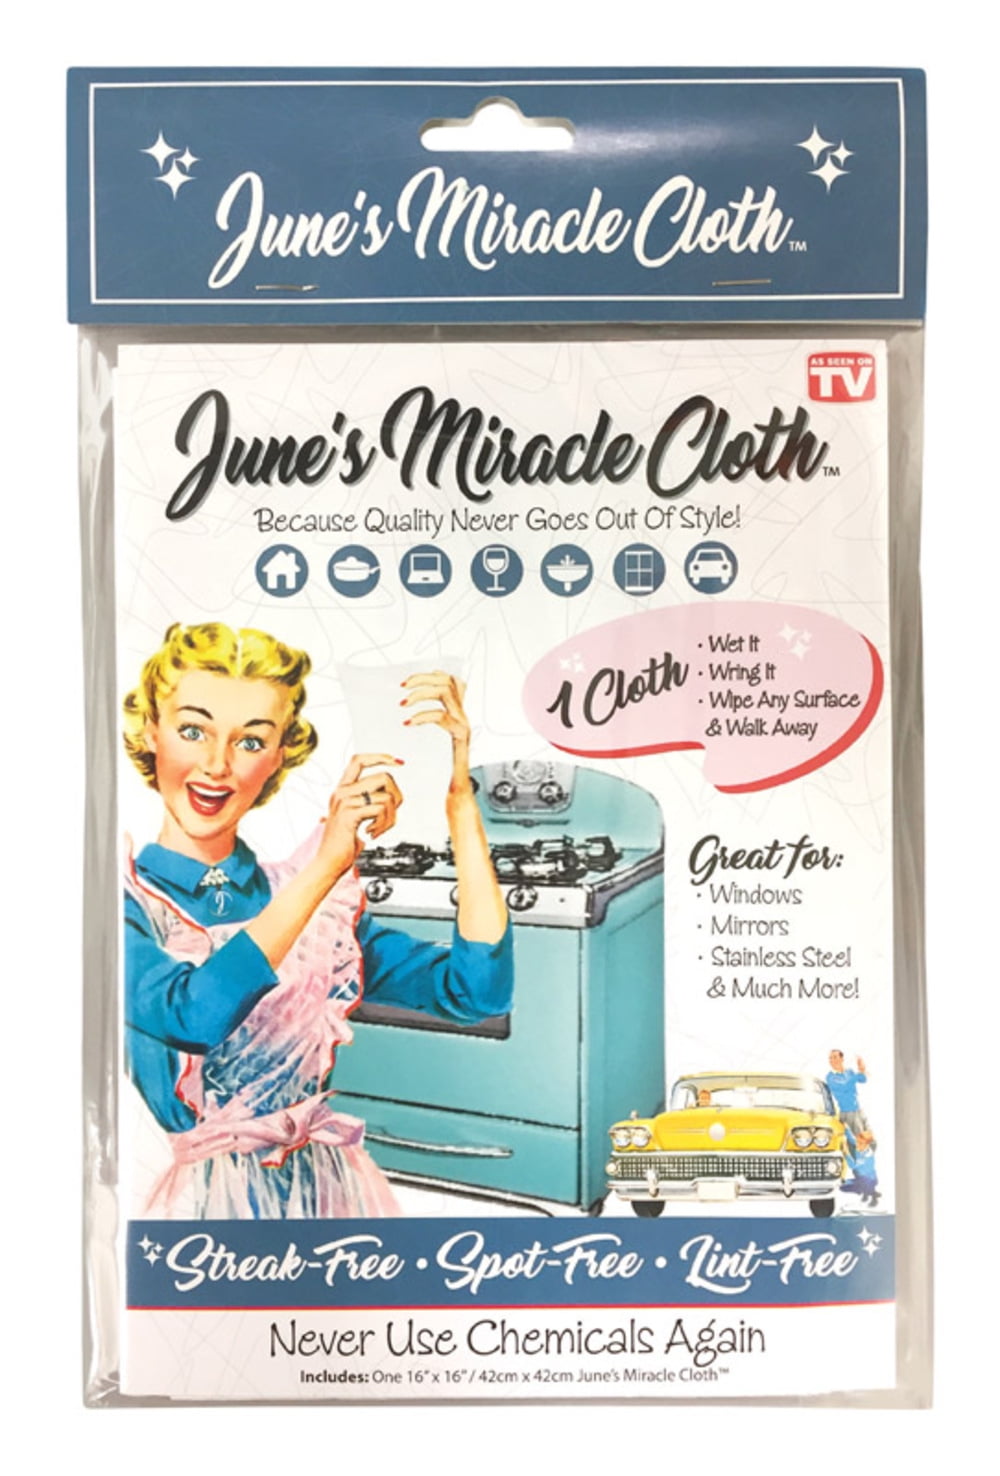 Does It Work: June's Miracle Cloth 